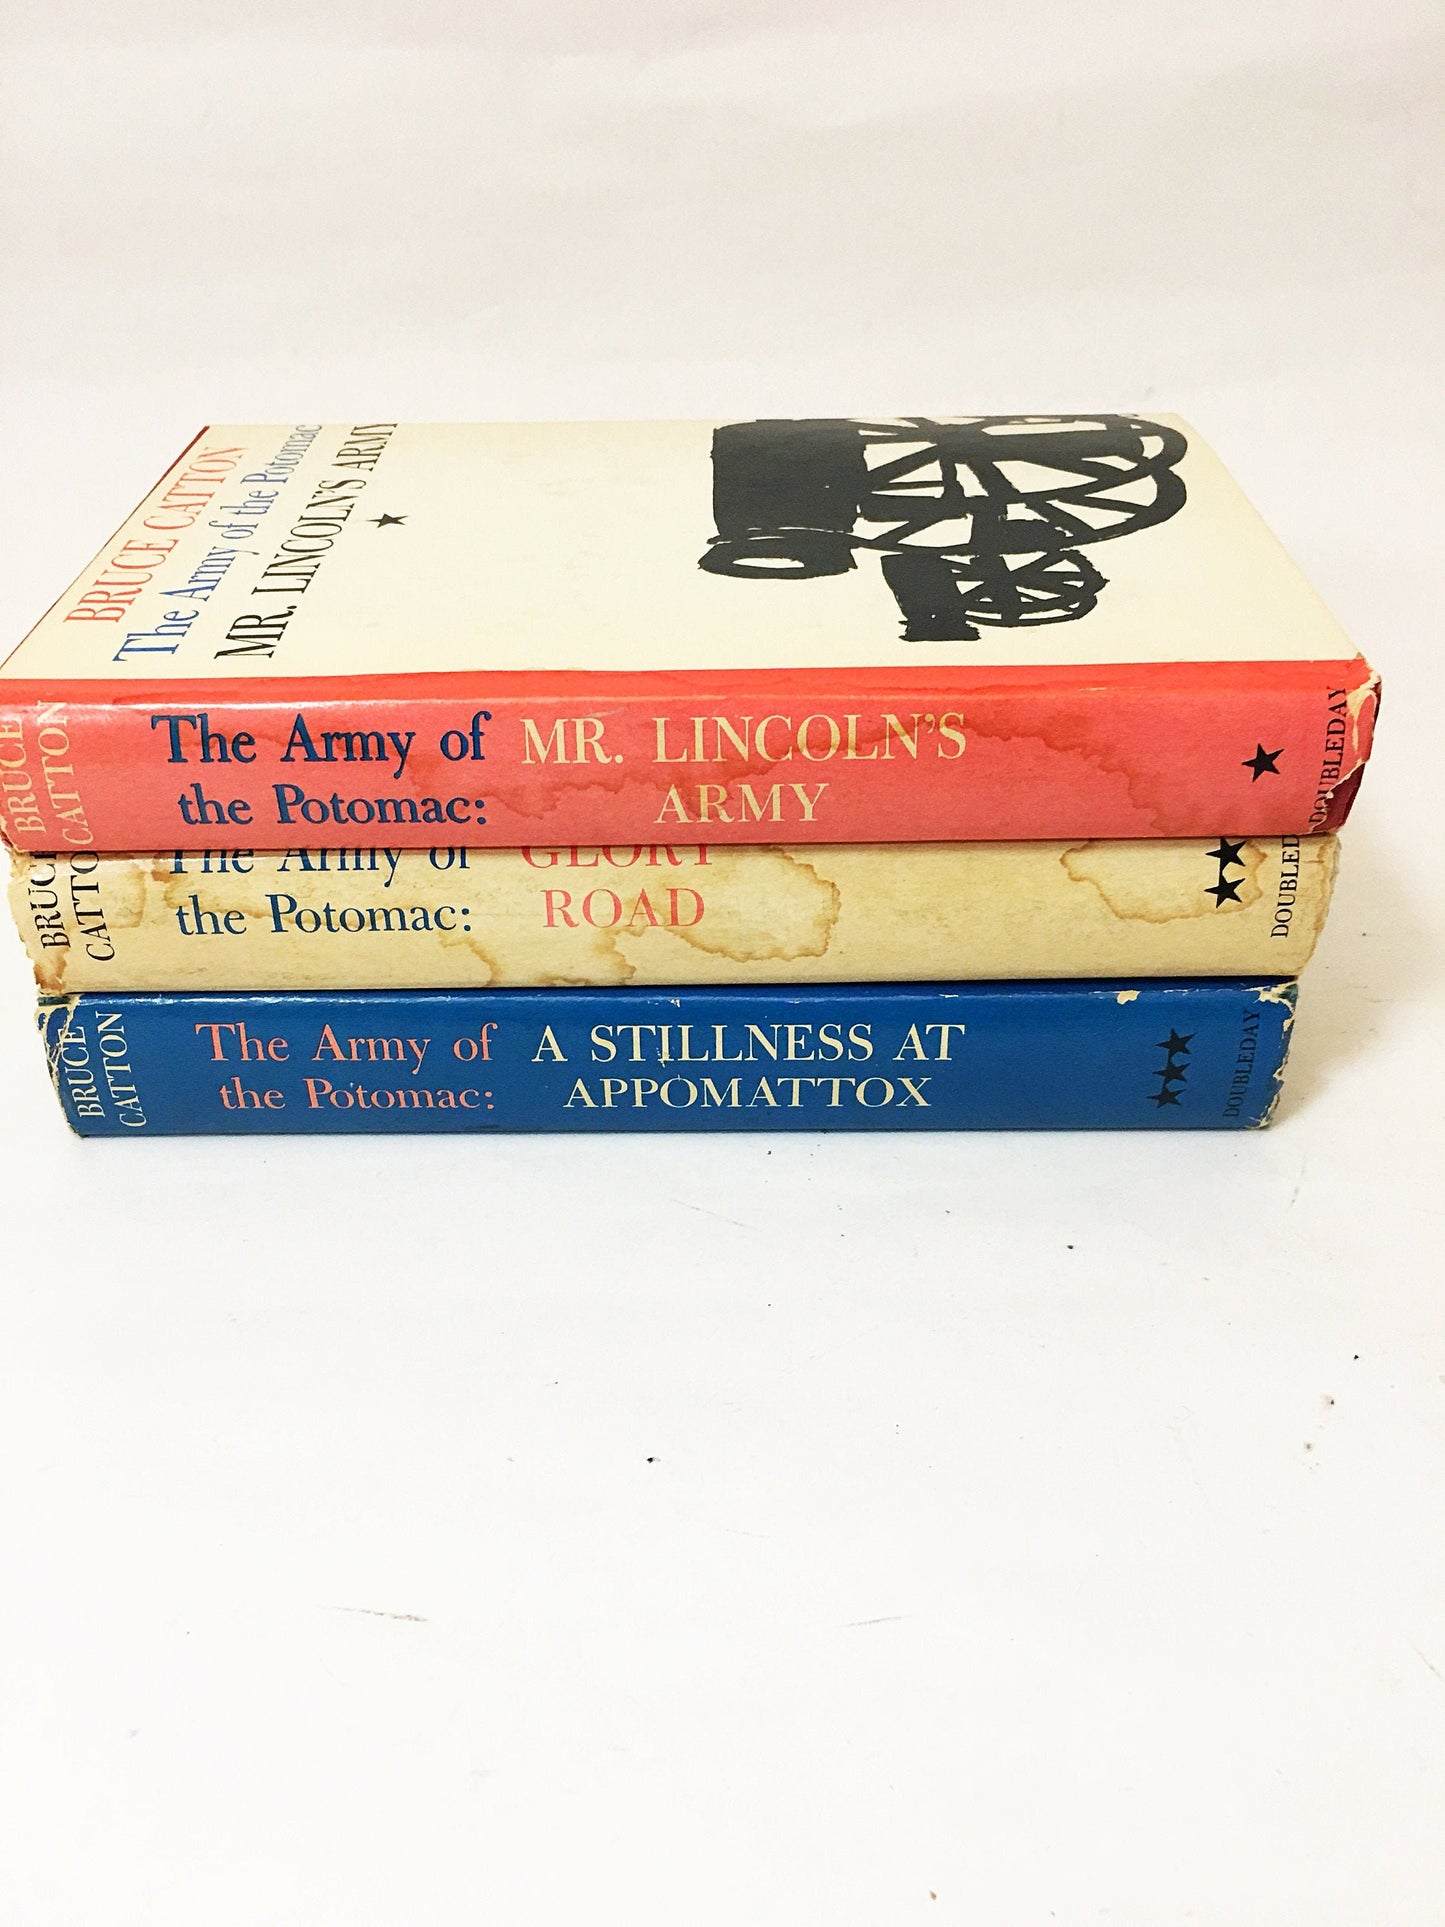 1953 Catton Army of the Potomac 3 volume vintage book set Mr. Lincoln's Army; Glory Road; Stillness at Appomattox. Prop staging home decor